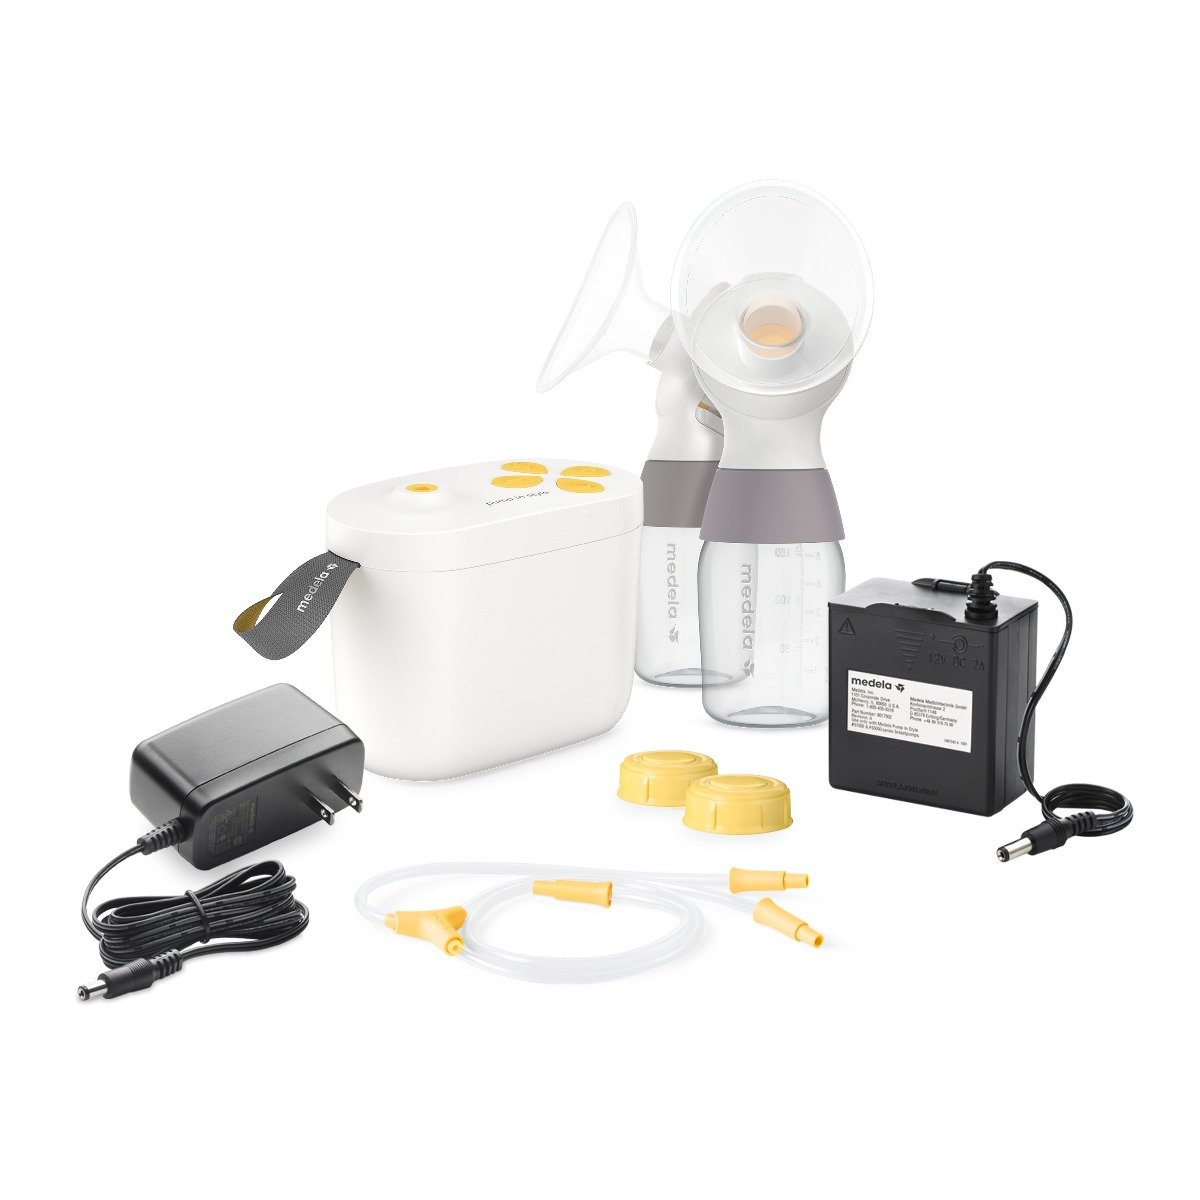 Unsponsored Comparison Review of the Medela Pump vs. Spectra vs. the Willow  — Fairly Curated